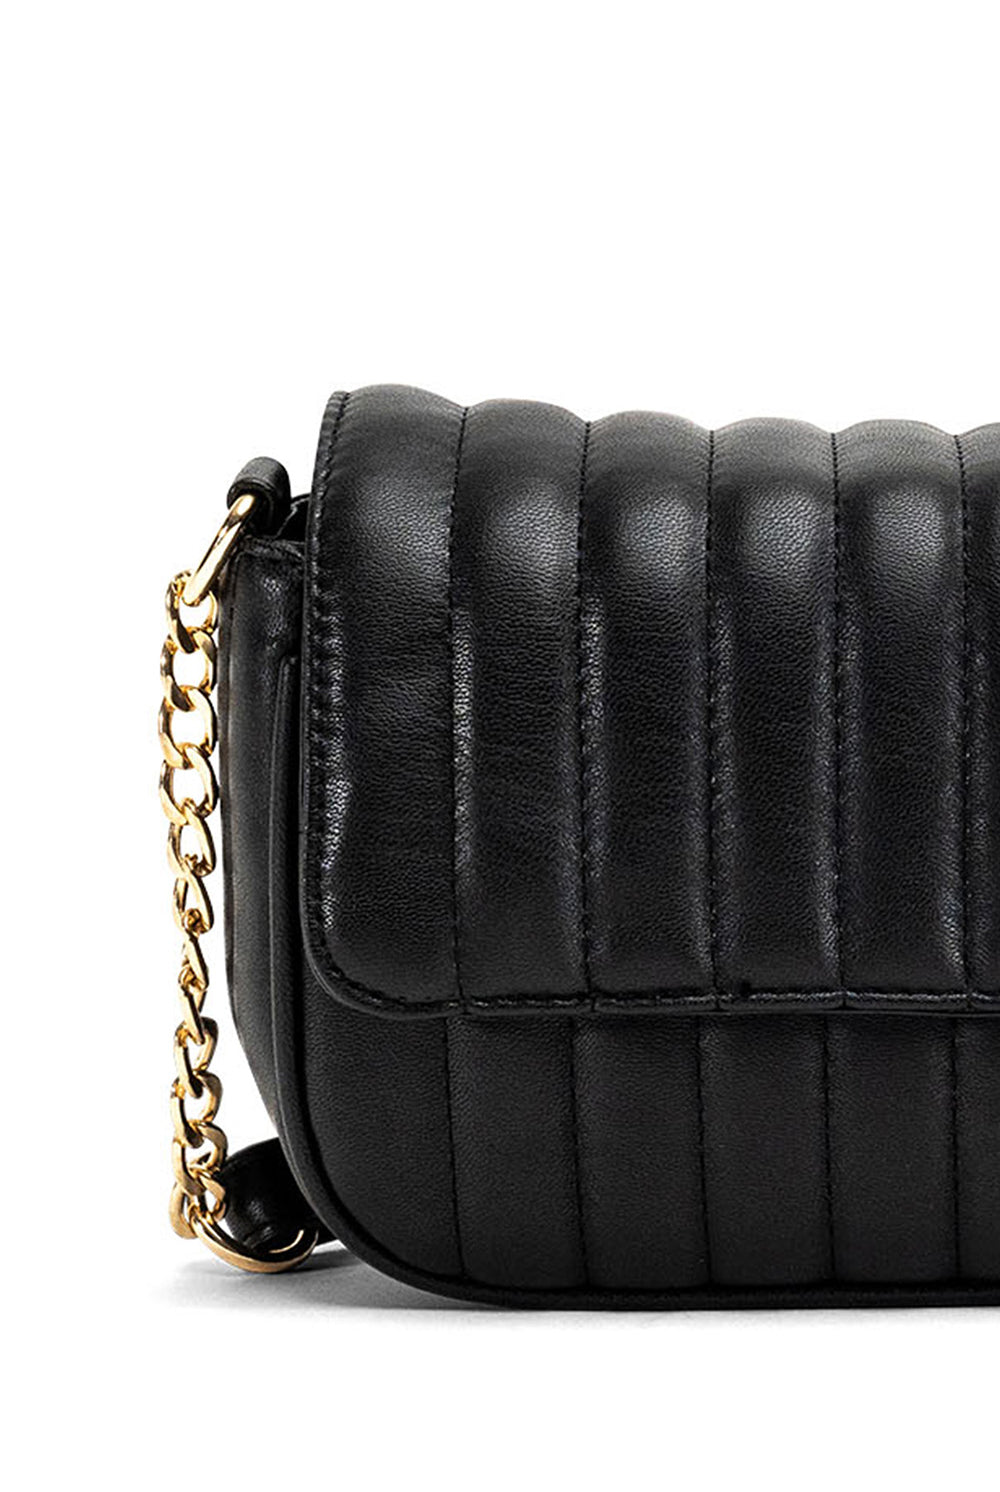 My Accessories London Padded quilted crossbody bag in Black | Shoulder Bag | Adjustable | Vegan | Minimal | Casual | Travel | Everyday | Women  | Women's | Accessories | Accessory | 